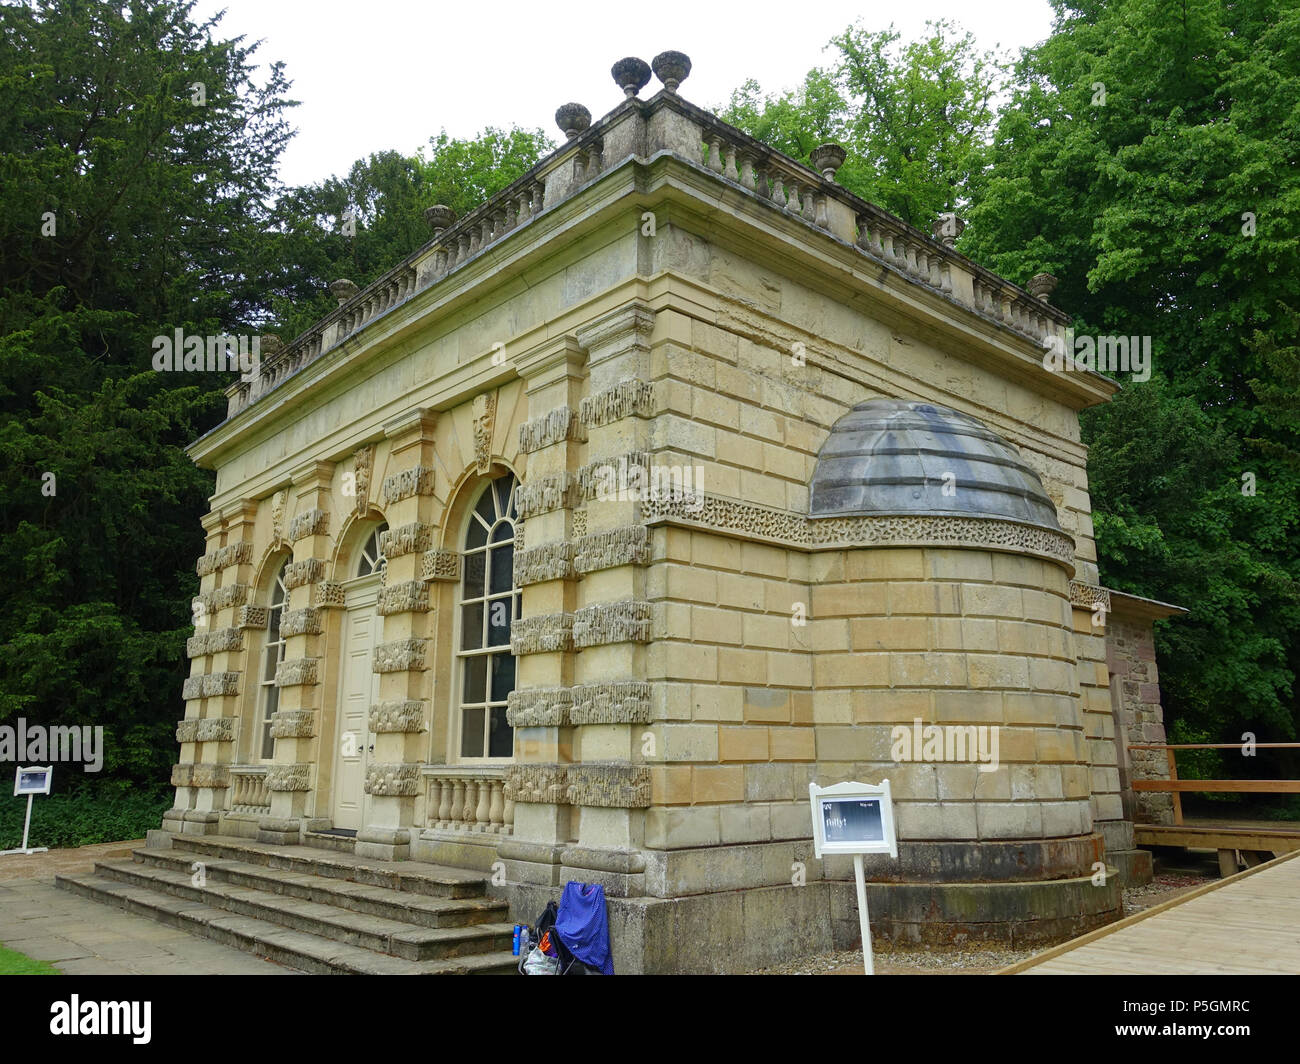 N/A. English: Banqueting House, Studley Royal Park - North Yorkshire, England. 14 June 2016, 08:42:07. Daderot 168 Banqueting House, Studley Royal Park - North Yorkshire, England - DSC00730 Stock Photo